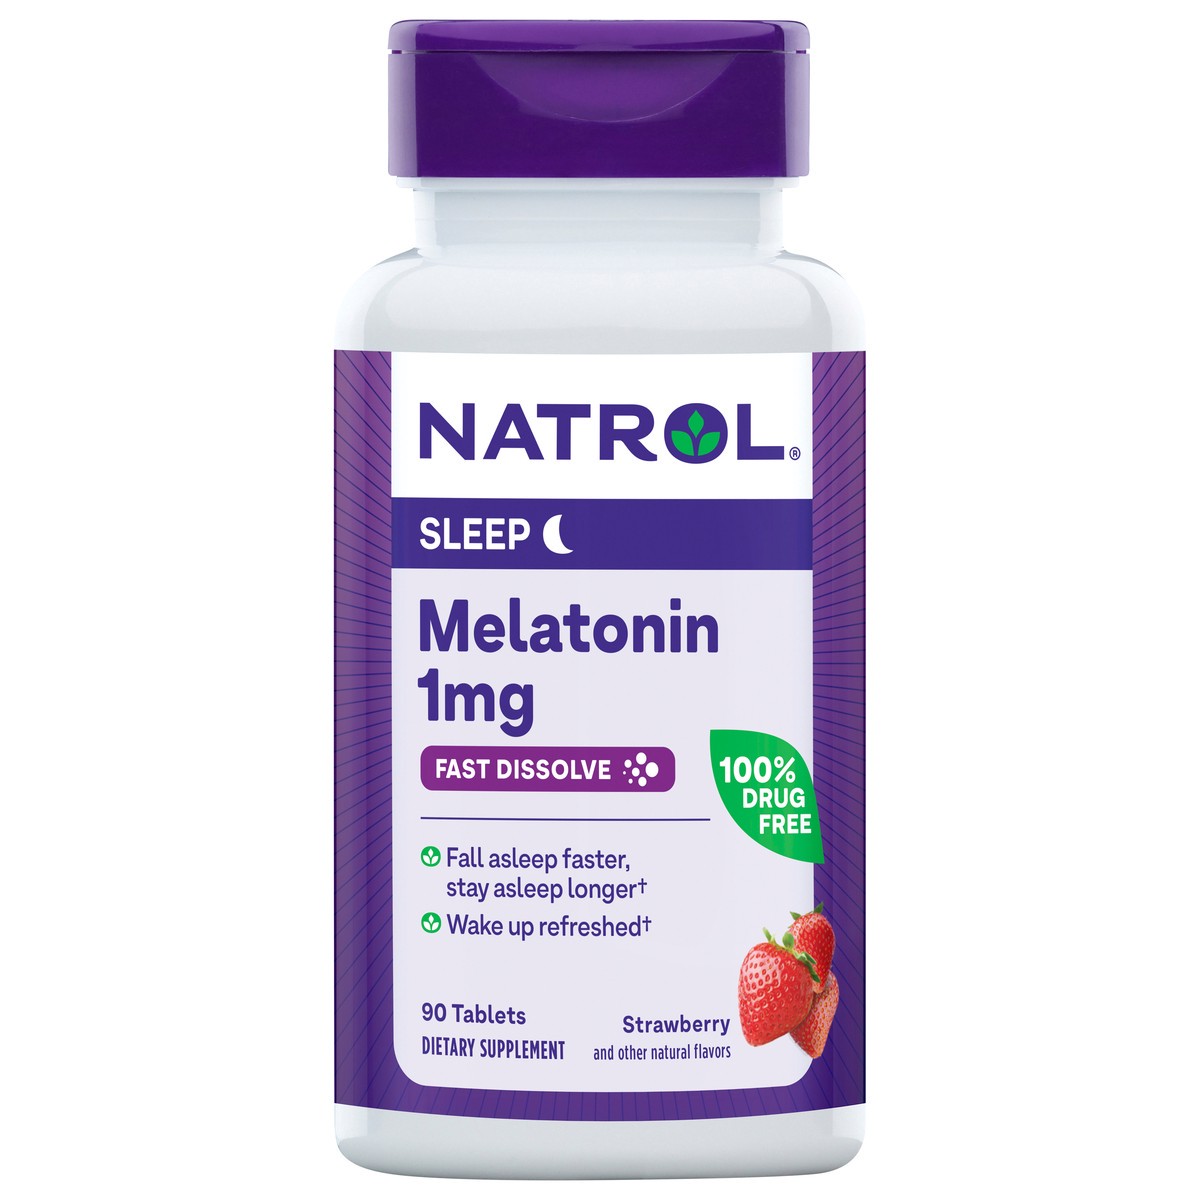 slide 1 of 9, Natrol Melatonin 1mg, Strawberry-Flavored Dietary Supplement for Restful Sleep, 90 Fast-Dissolve Tablets, 90 Day Supply, 90 ct